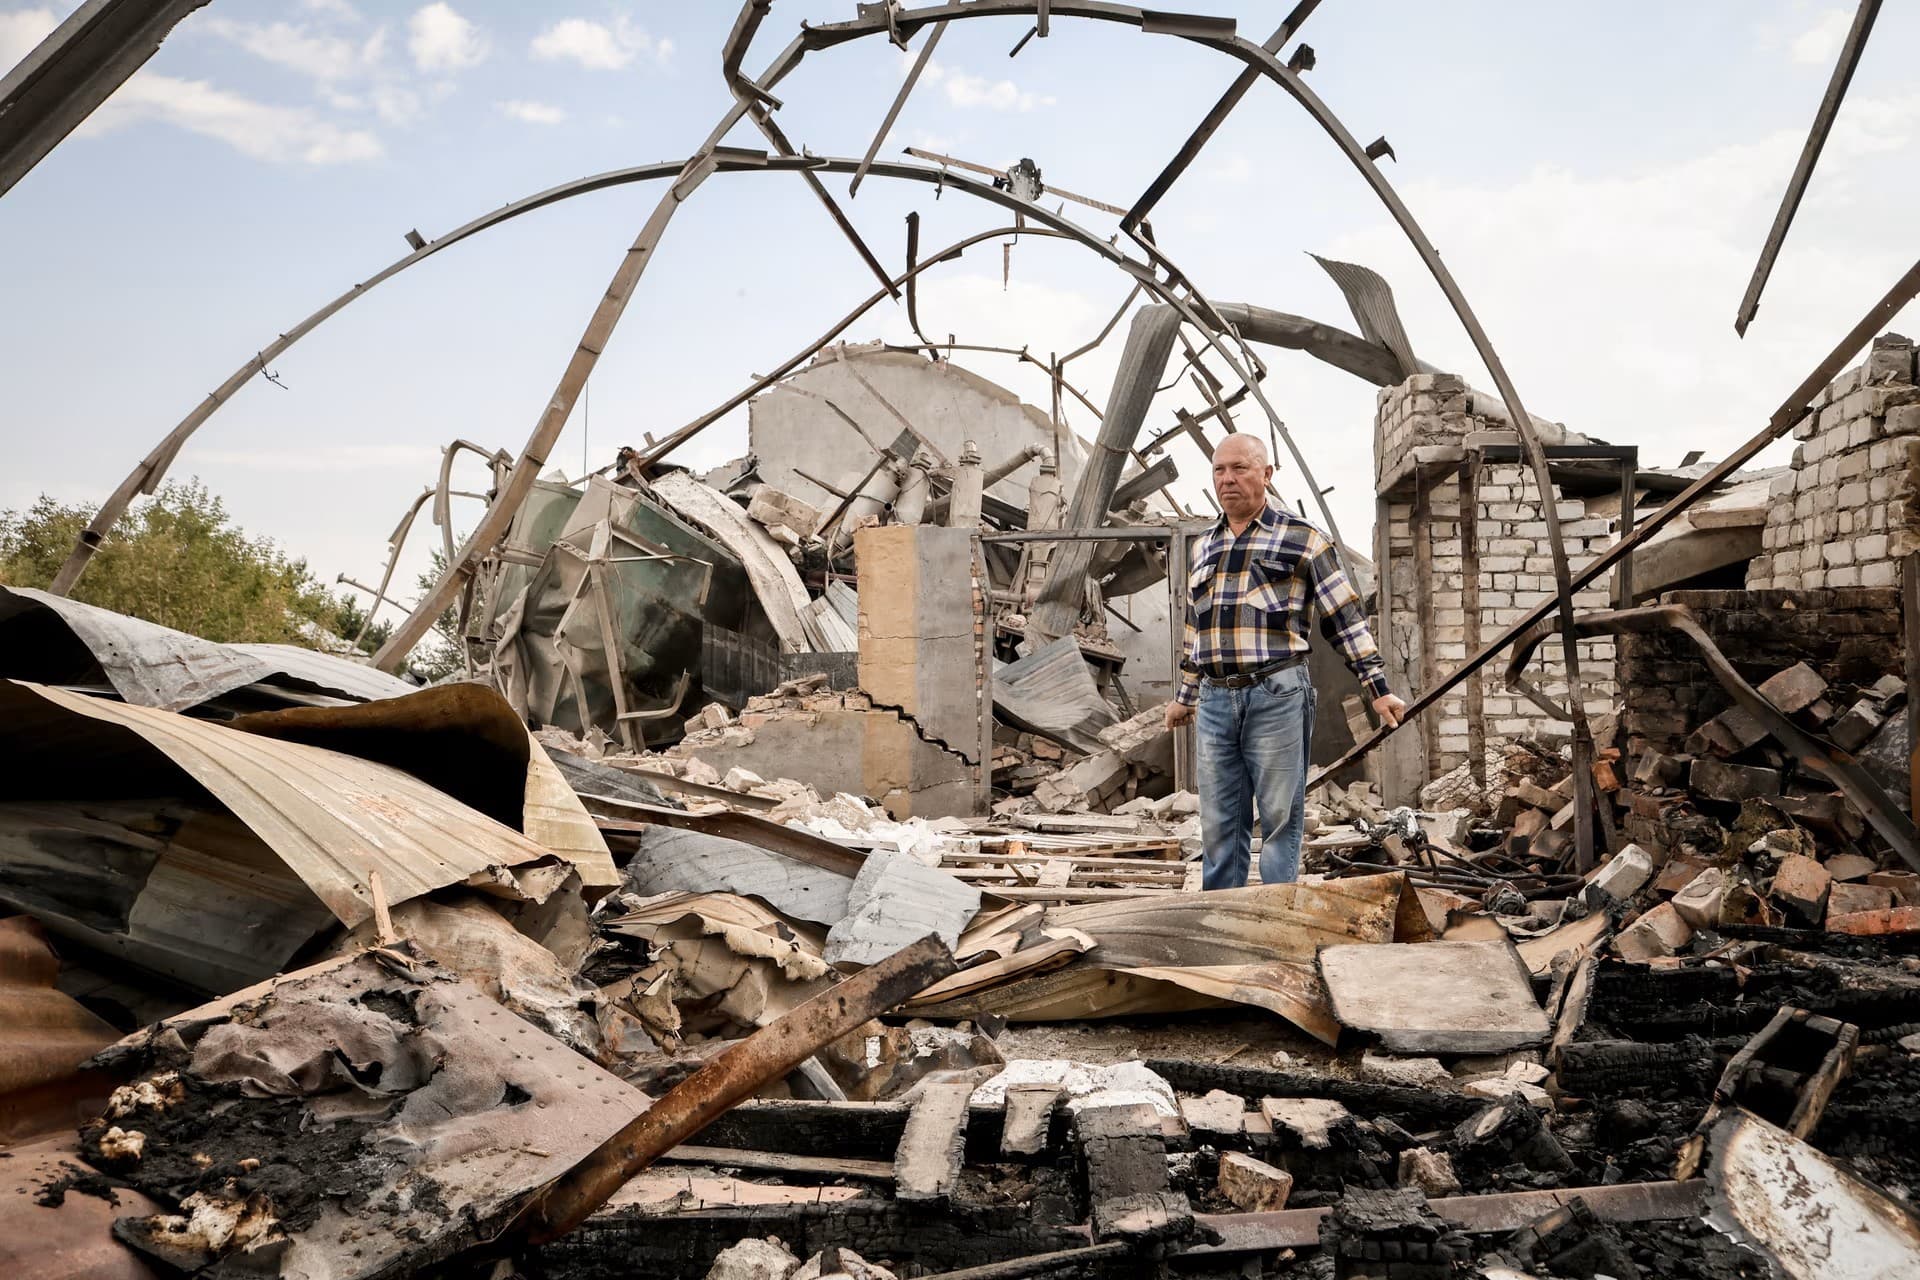 Ukrainian farmer inspects the rubble of a destroyed grain storage on his farm, near the frontline town of Orikhiv